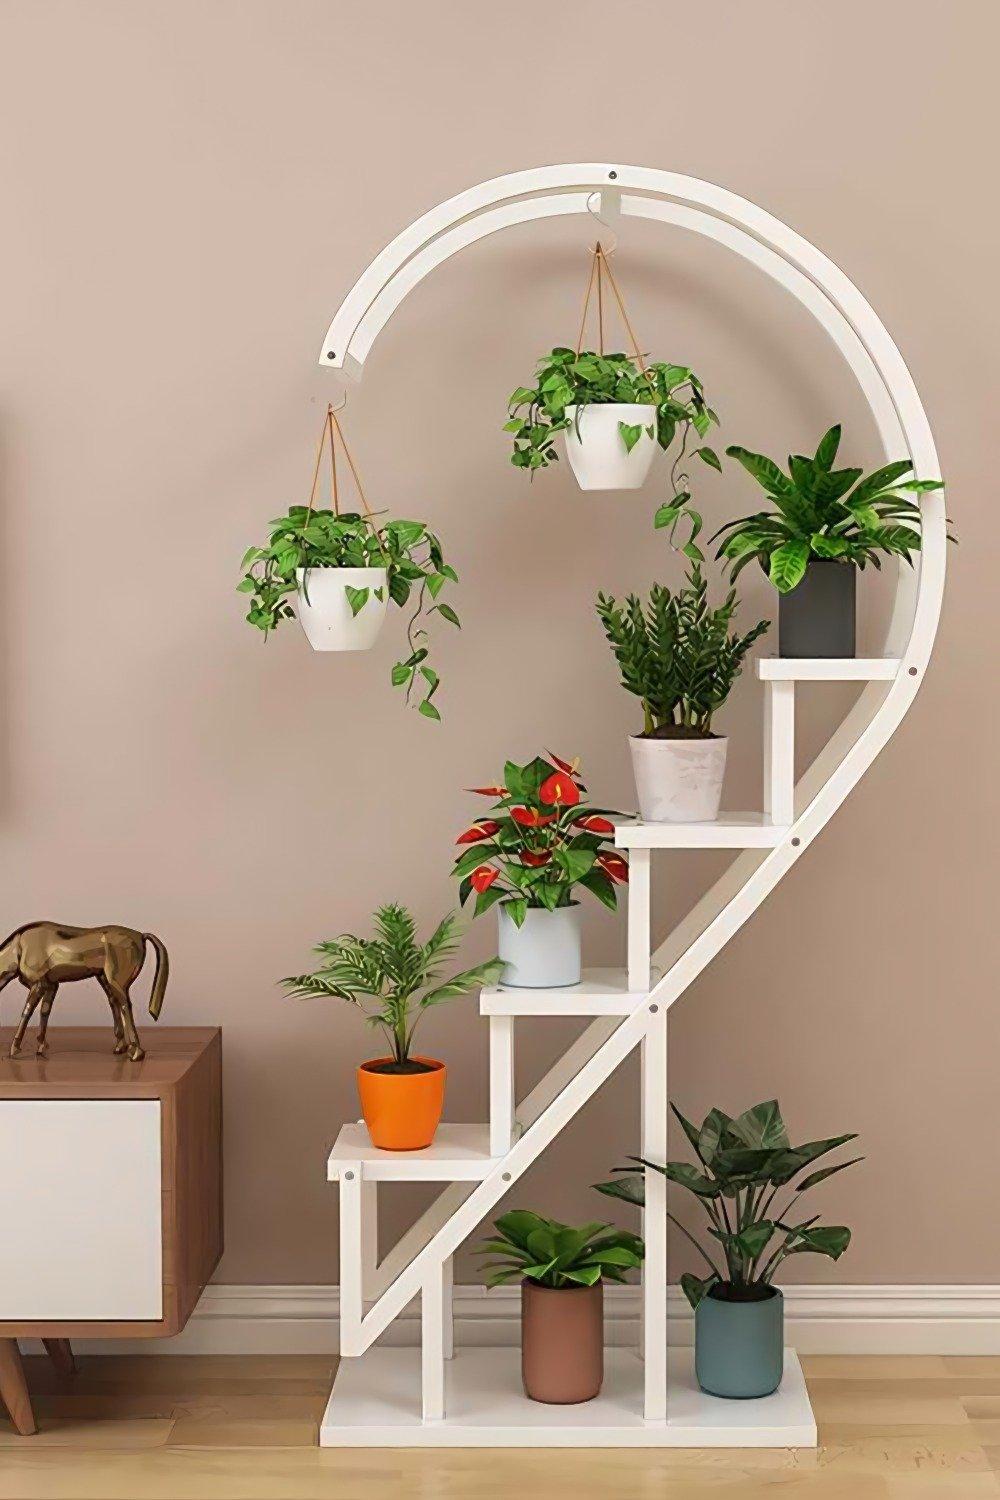 4 tier Myrna Free Form Multi Tiered Plant Stand